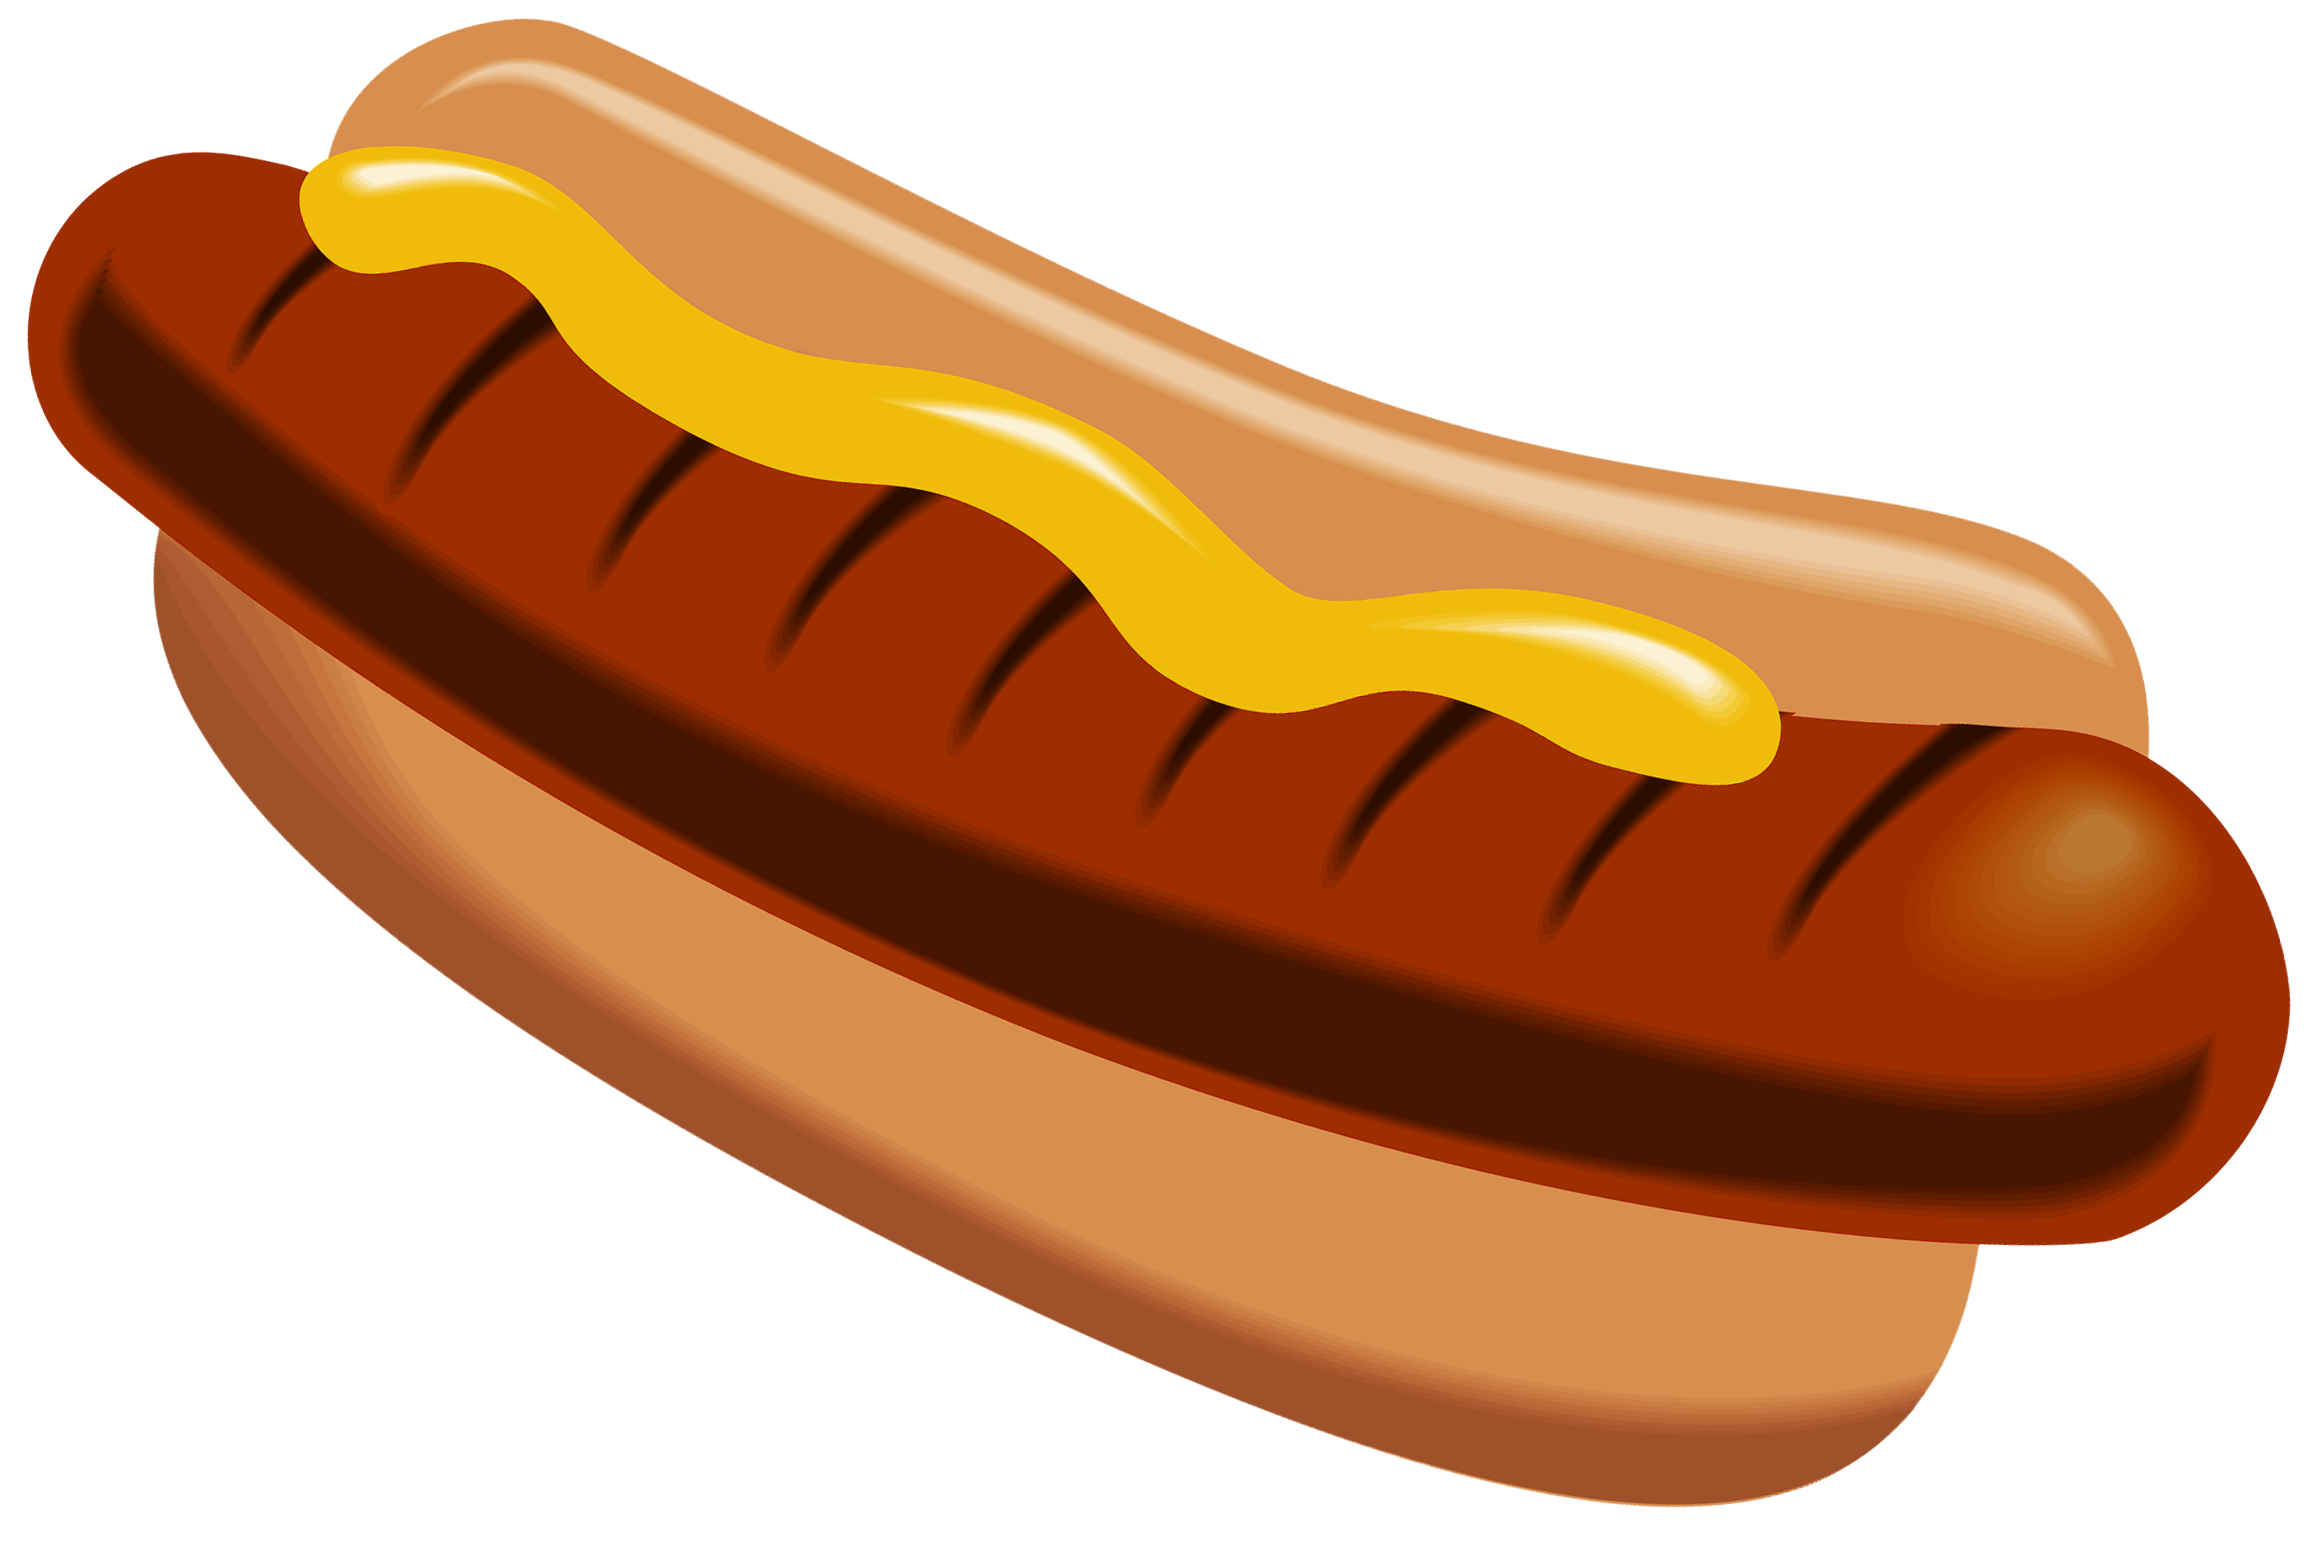 Hot Dog With Mustard Png Clipart Picture Gallery Yopriceville Images, Photos, Reviews